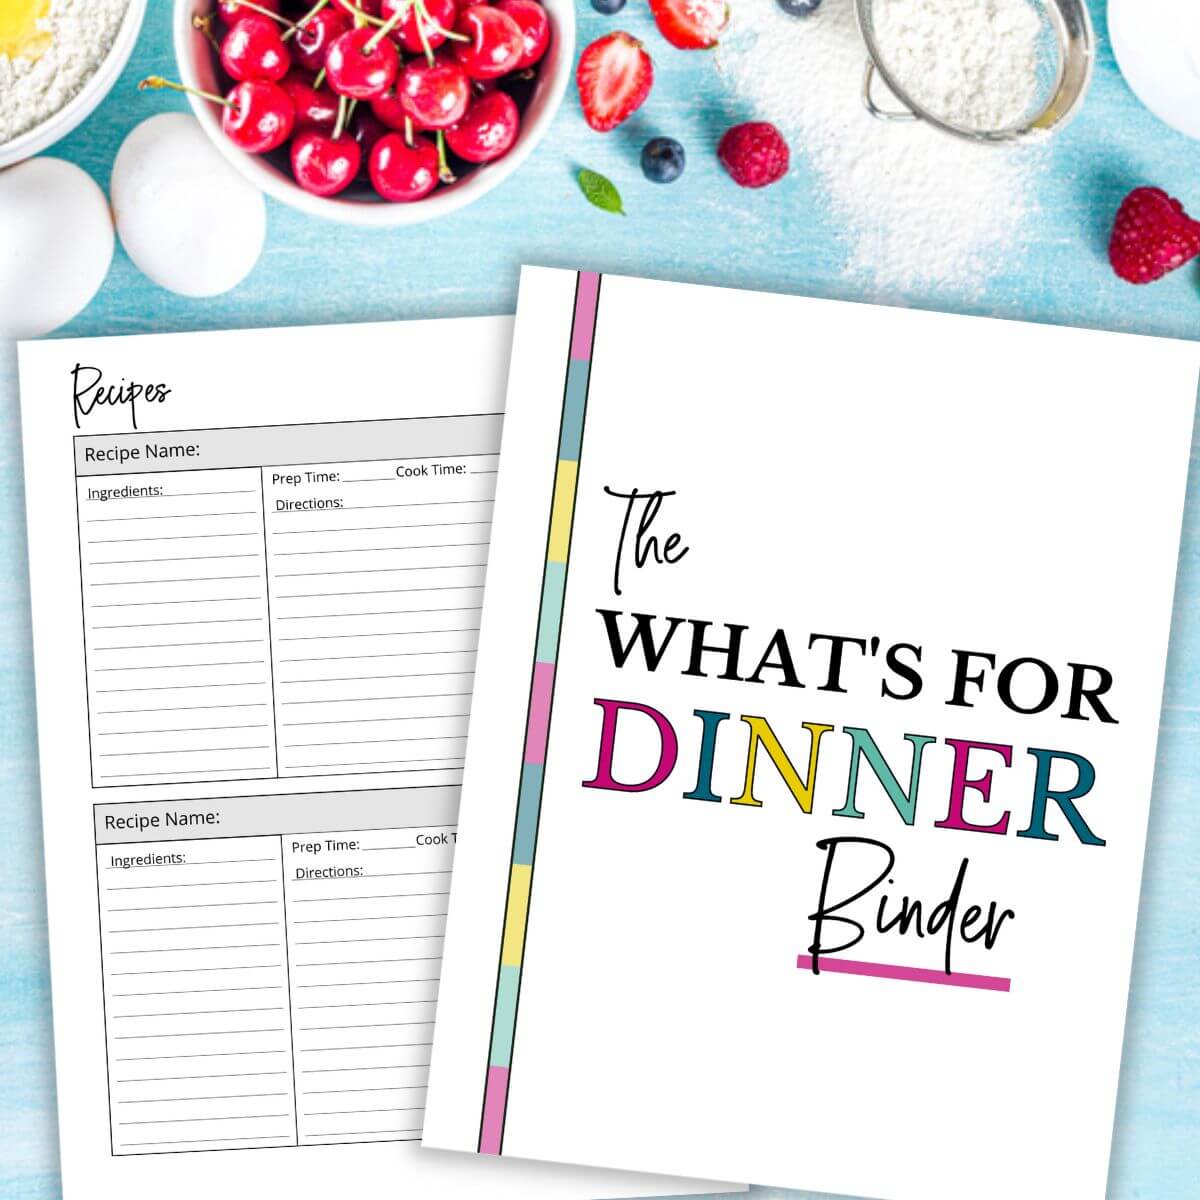 DIY Recipe Book with a Free Recipe Binder Printable - YES! we made this